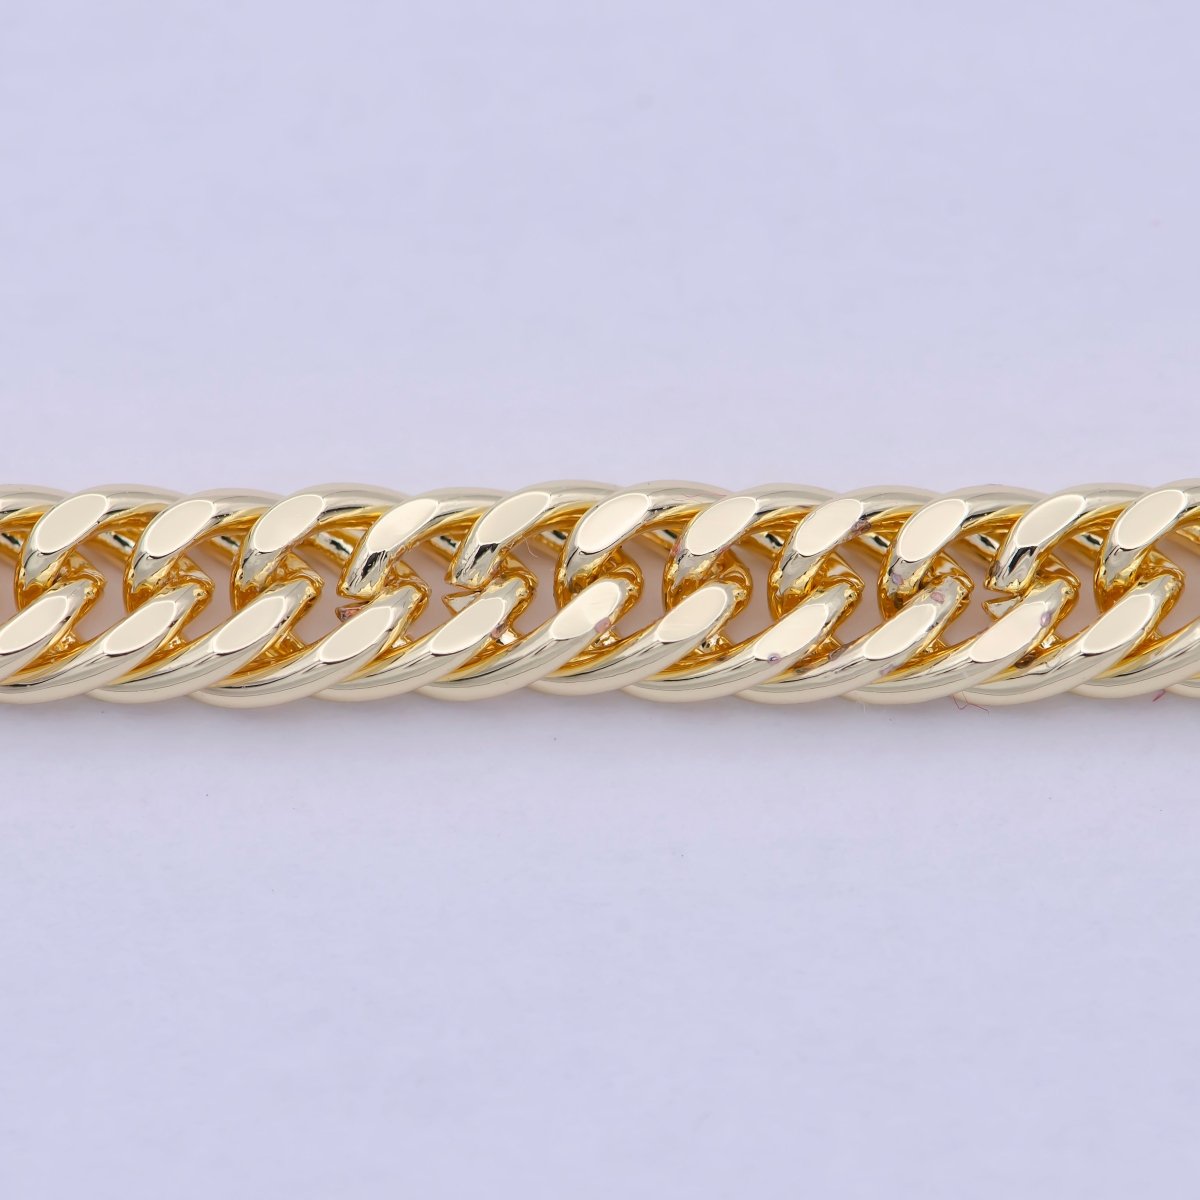 Cuban Chain Necklace, Thick Gold Chain Necklace 5mm Chain Necklace, Jewelry for Men and Women, Curb Chain Necklace Statement Jewelry | WA-828 Clearance Pricing - DLUXCA